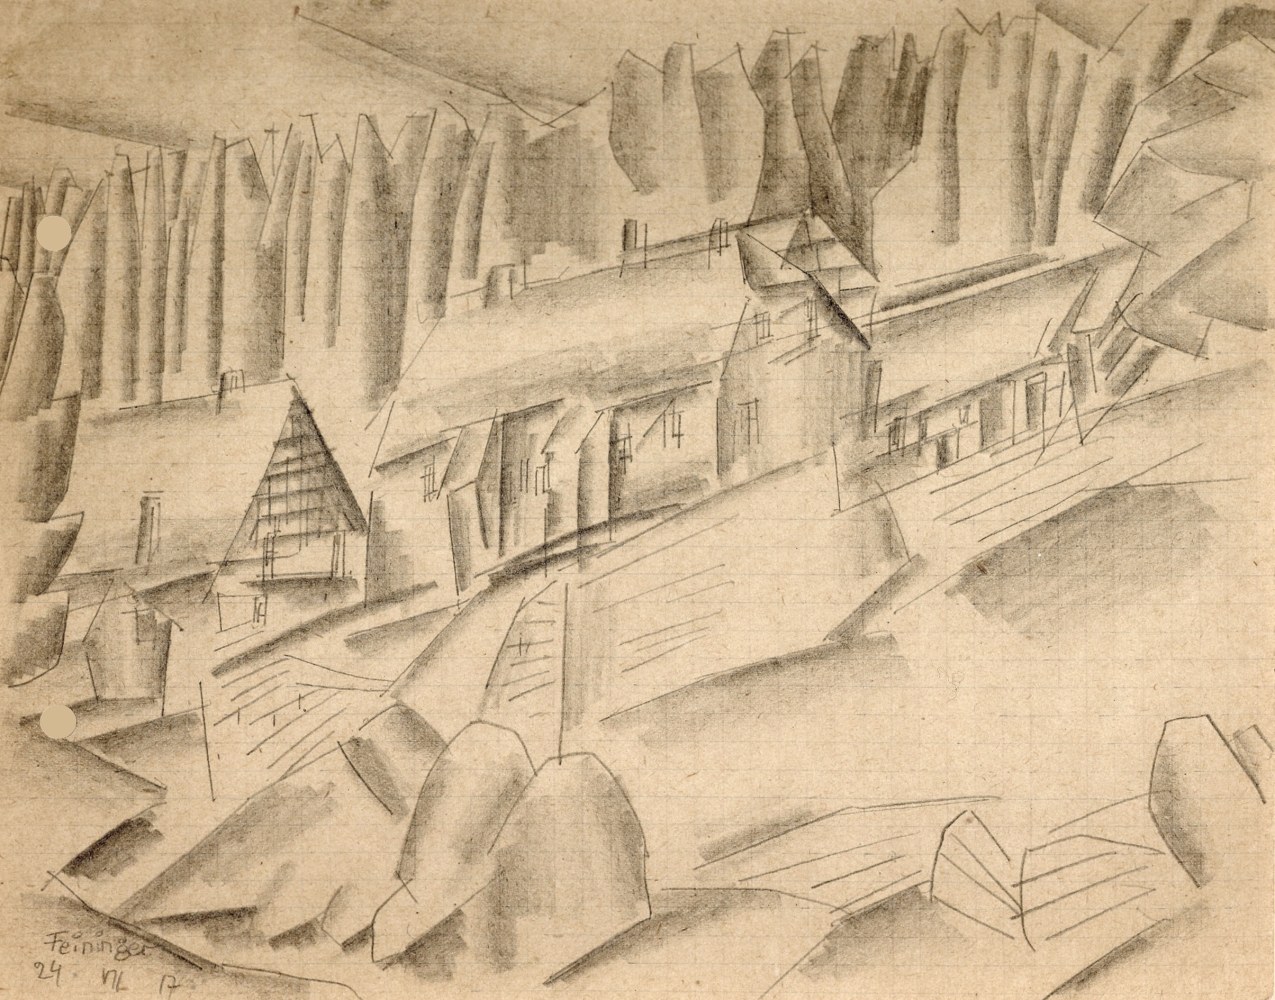 Lyonel&amp;nbsp;Feininger (1871&amp;ndash;1956)

(Houses in the Woods, Harz Mountains), 1917

Pencil on graph paper
6 1/2 x 8 1/8 in. (16.5 x 20.6 cm)
Signed and dated lower left:&amp;nbsp;Feininger 24 VII 17